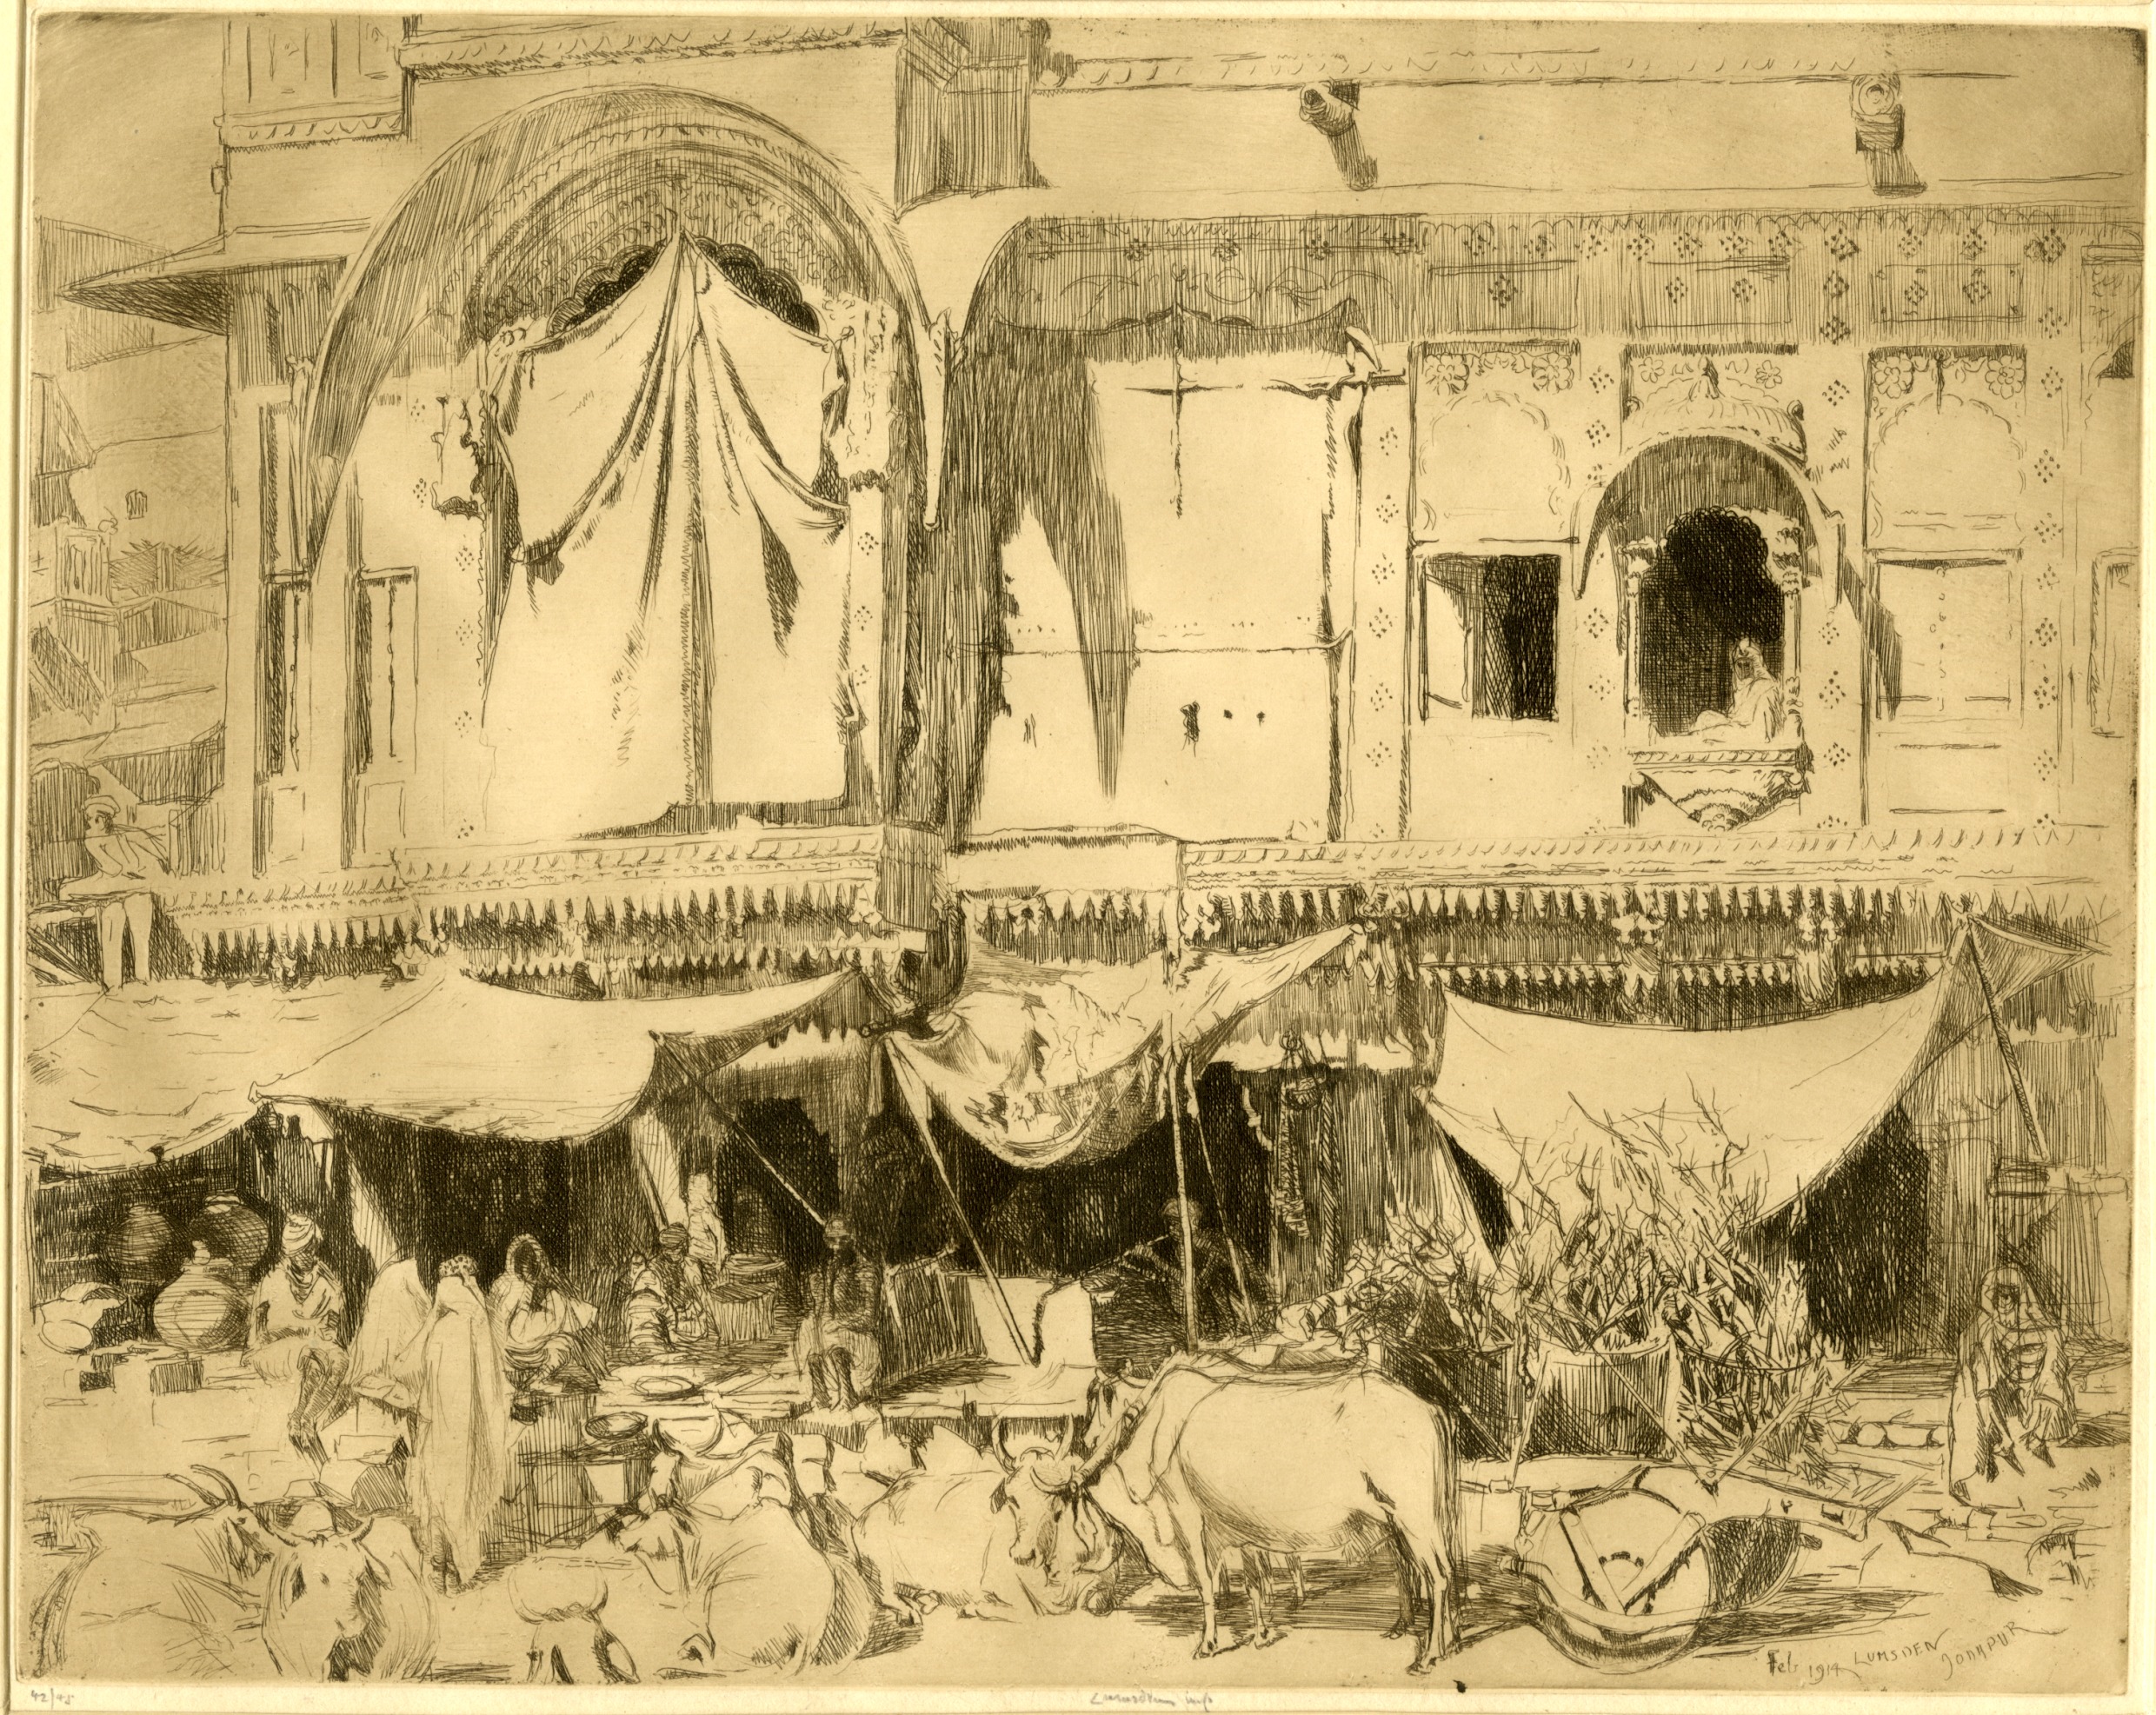 The Market-Place (Second Indian Plates Series) (1914)